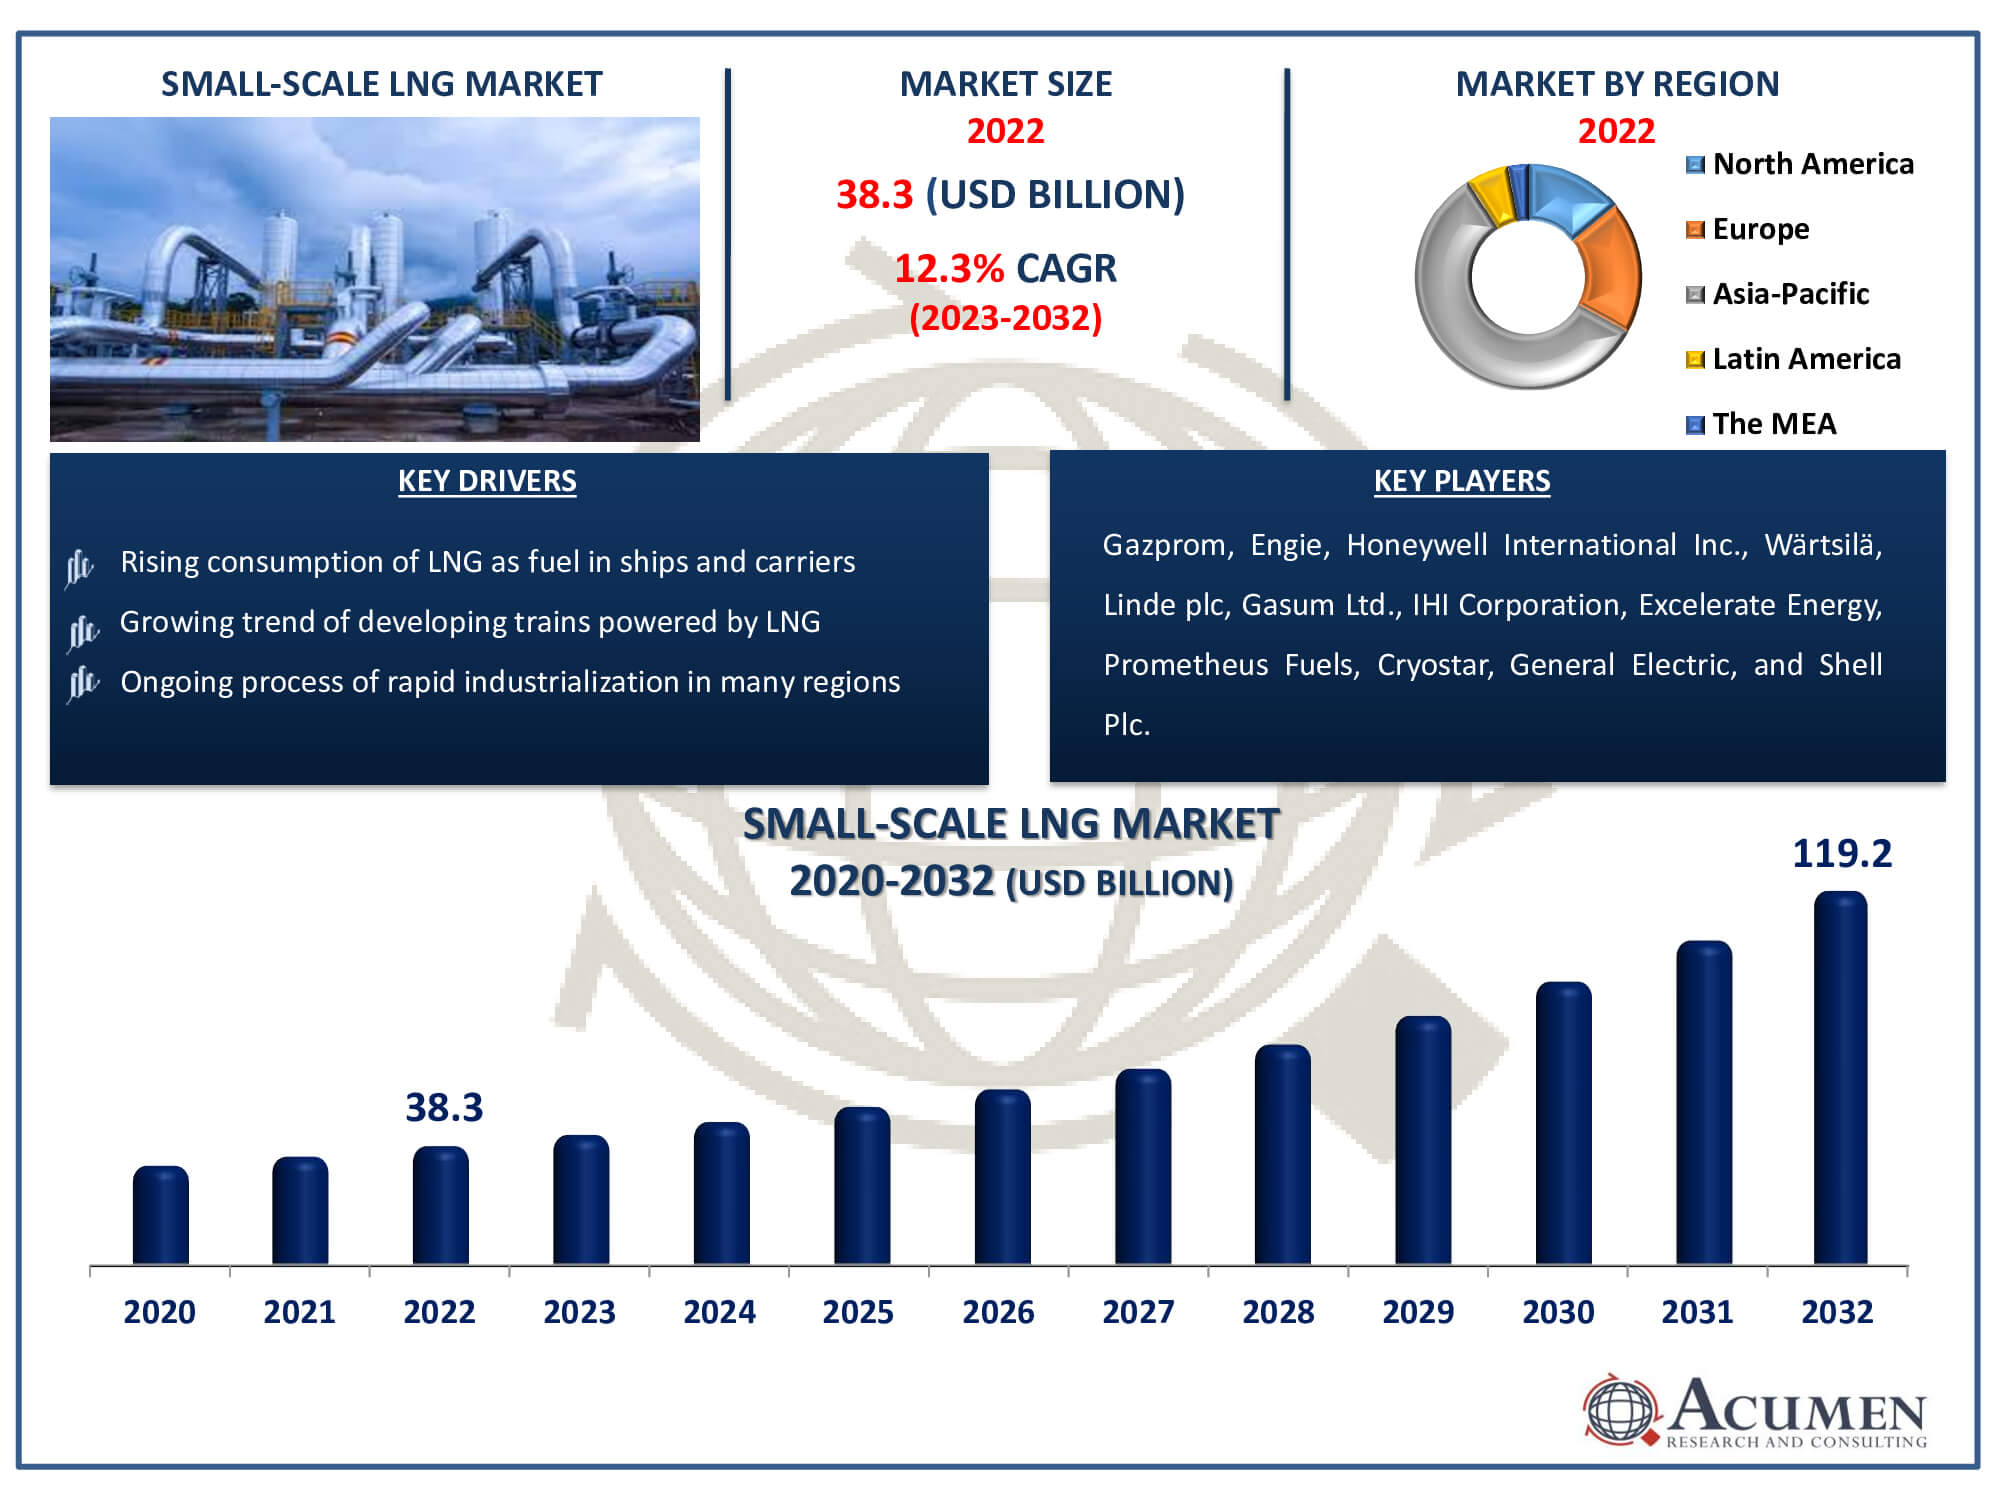 Small-Scale LNG Market Dynamics